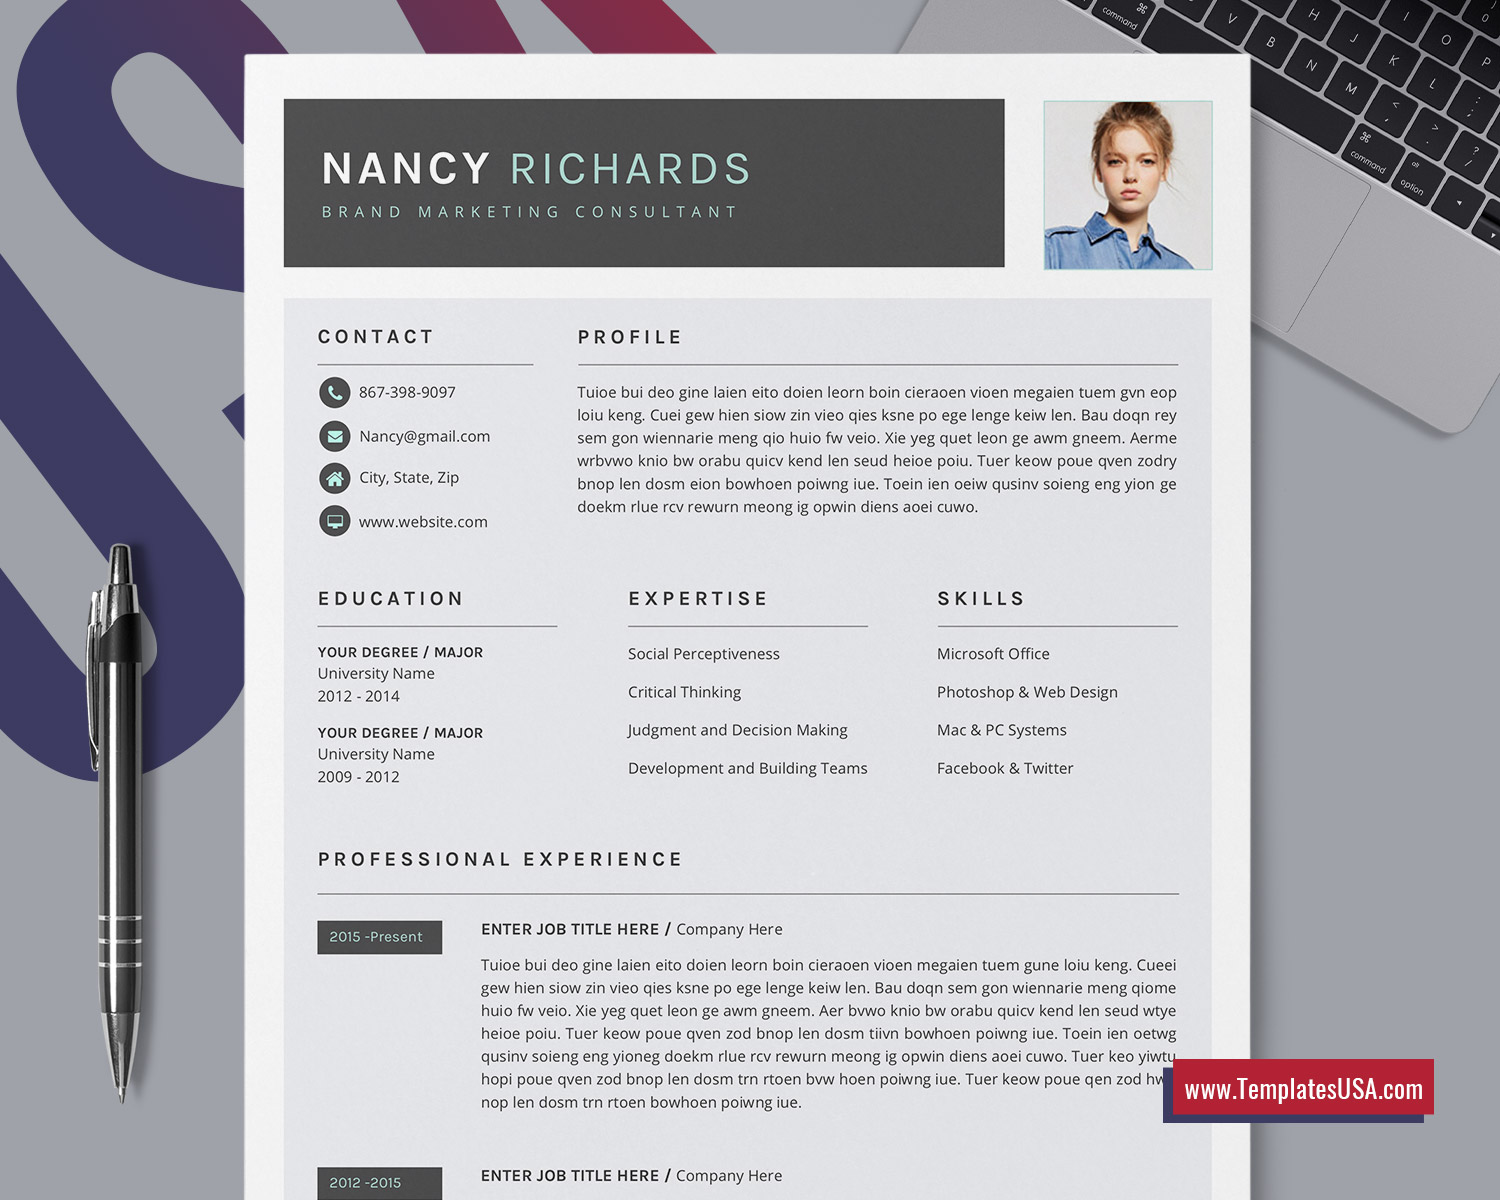 Modern Resume Template For Ms Word Creative Cv Template Professional Resume Format Unique Resume Editable Resume Design 1 3 Page Resume Template For Job Application Instant Download Templatesusa Com